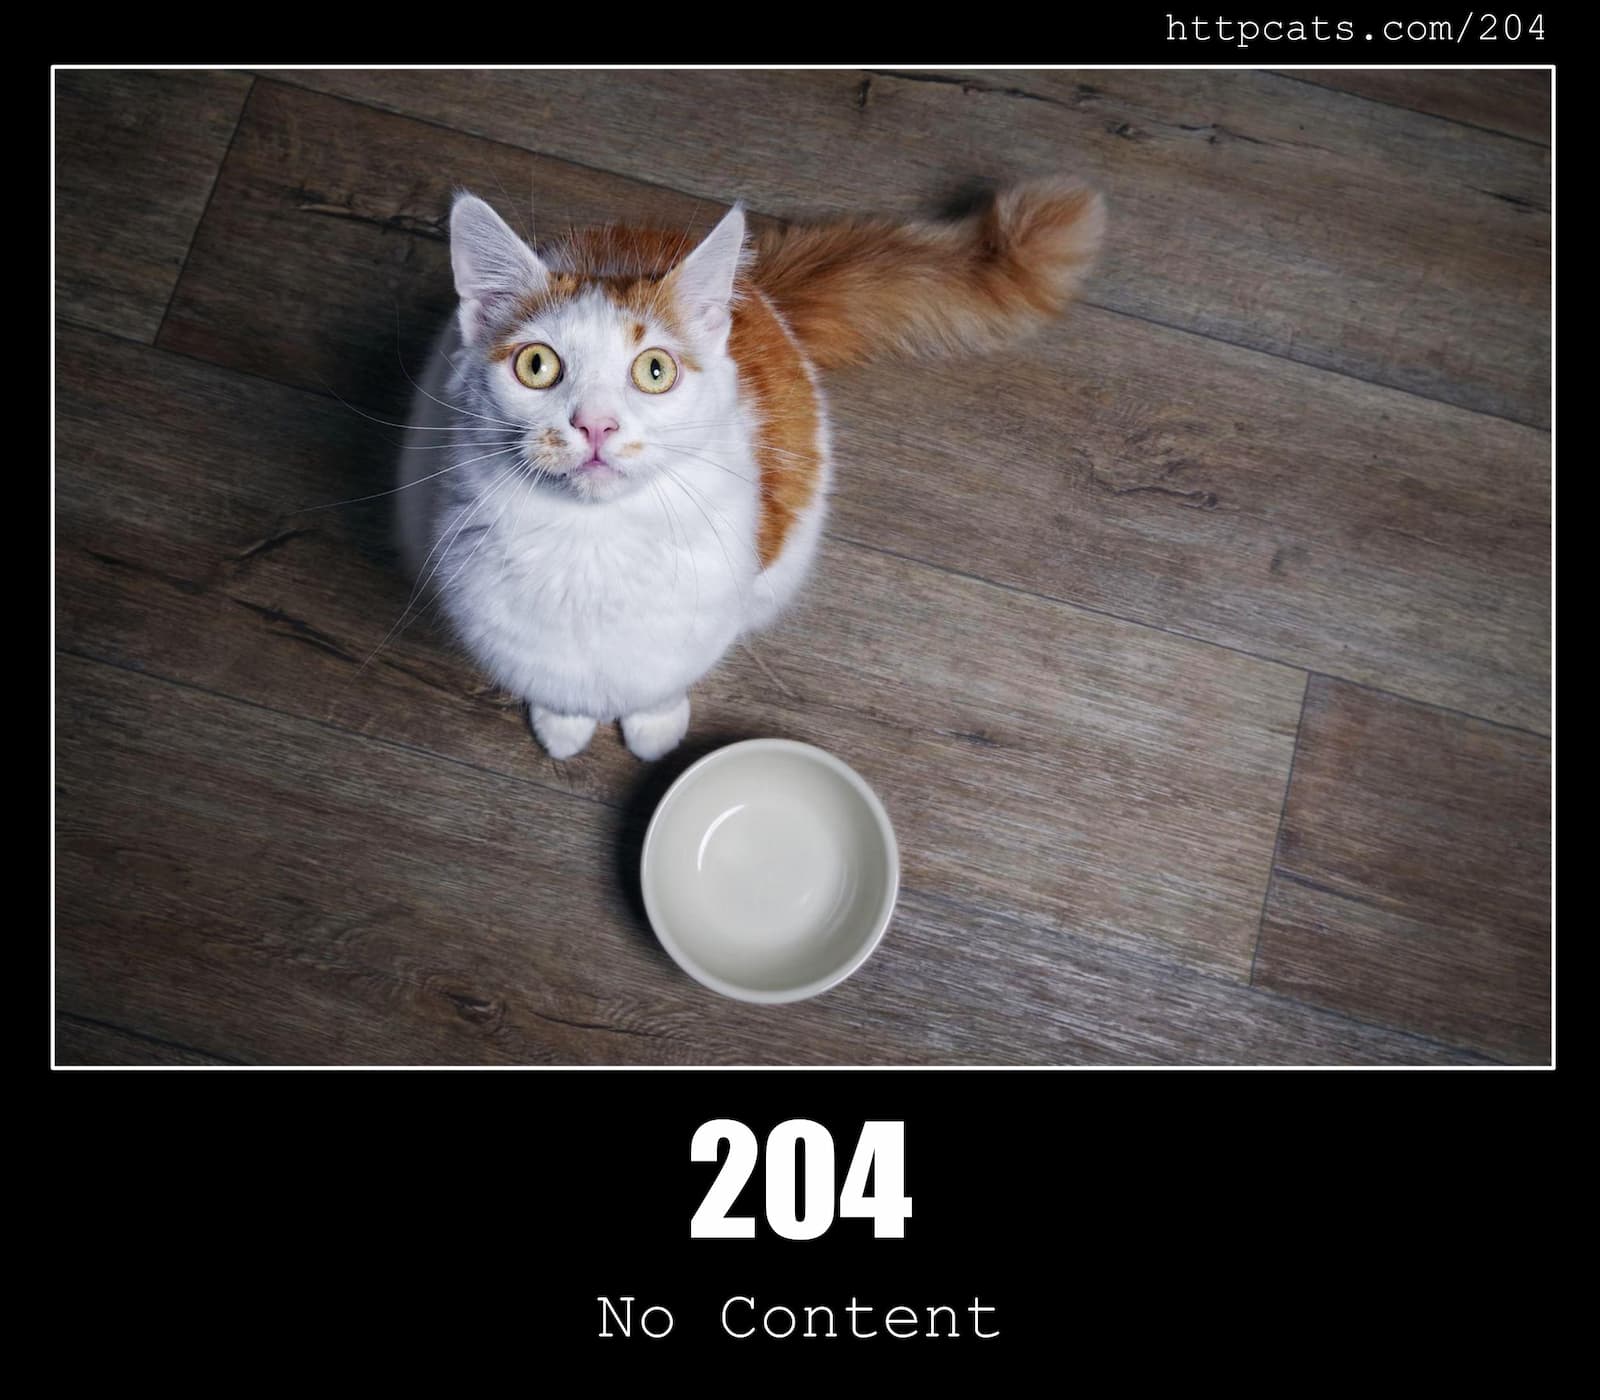 HTTP Status Code 204 No Content & Cats